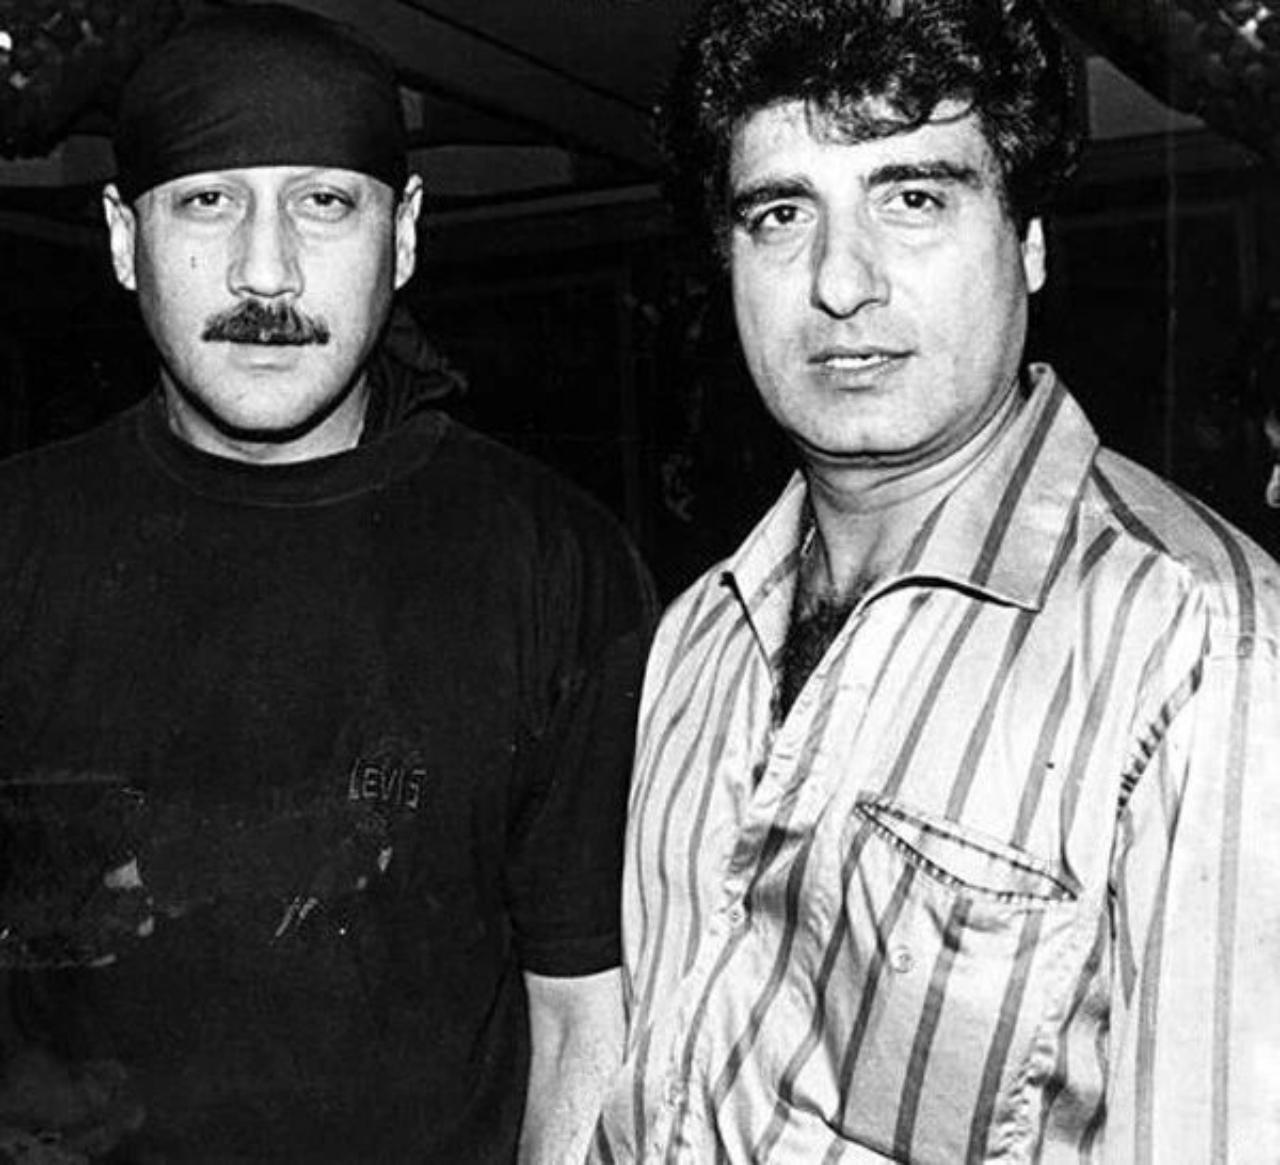 Babbar got the role after Vinod Khanna announced his retirment from movies, forcing the makers to replace him. However, things did not go as planned for Babbar